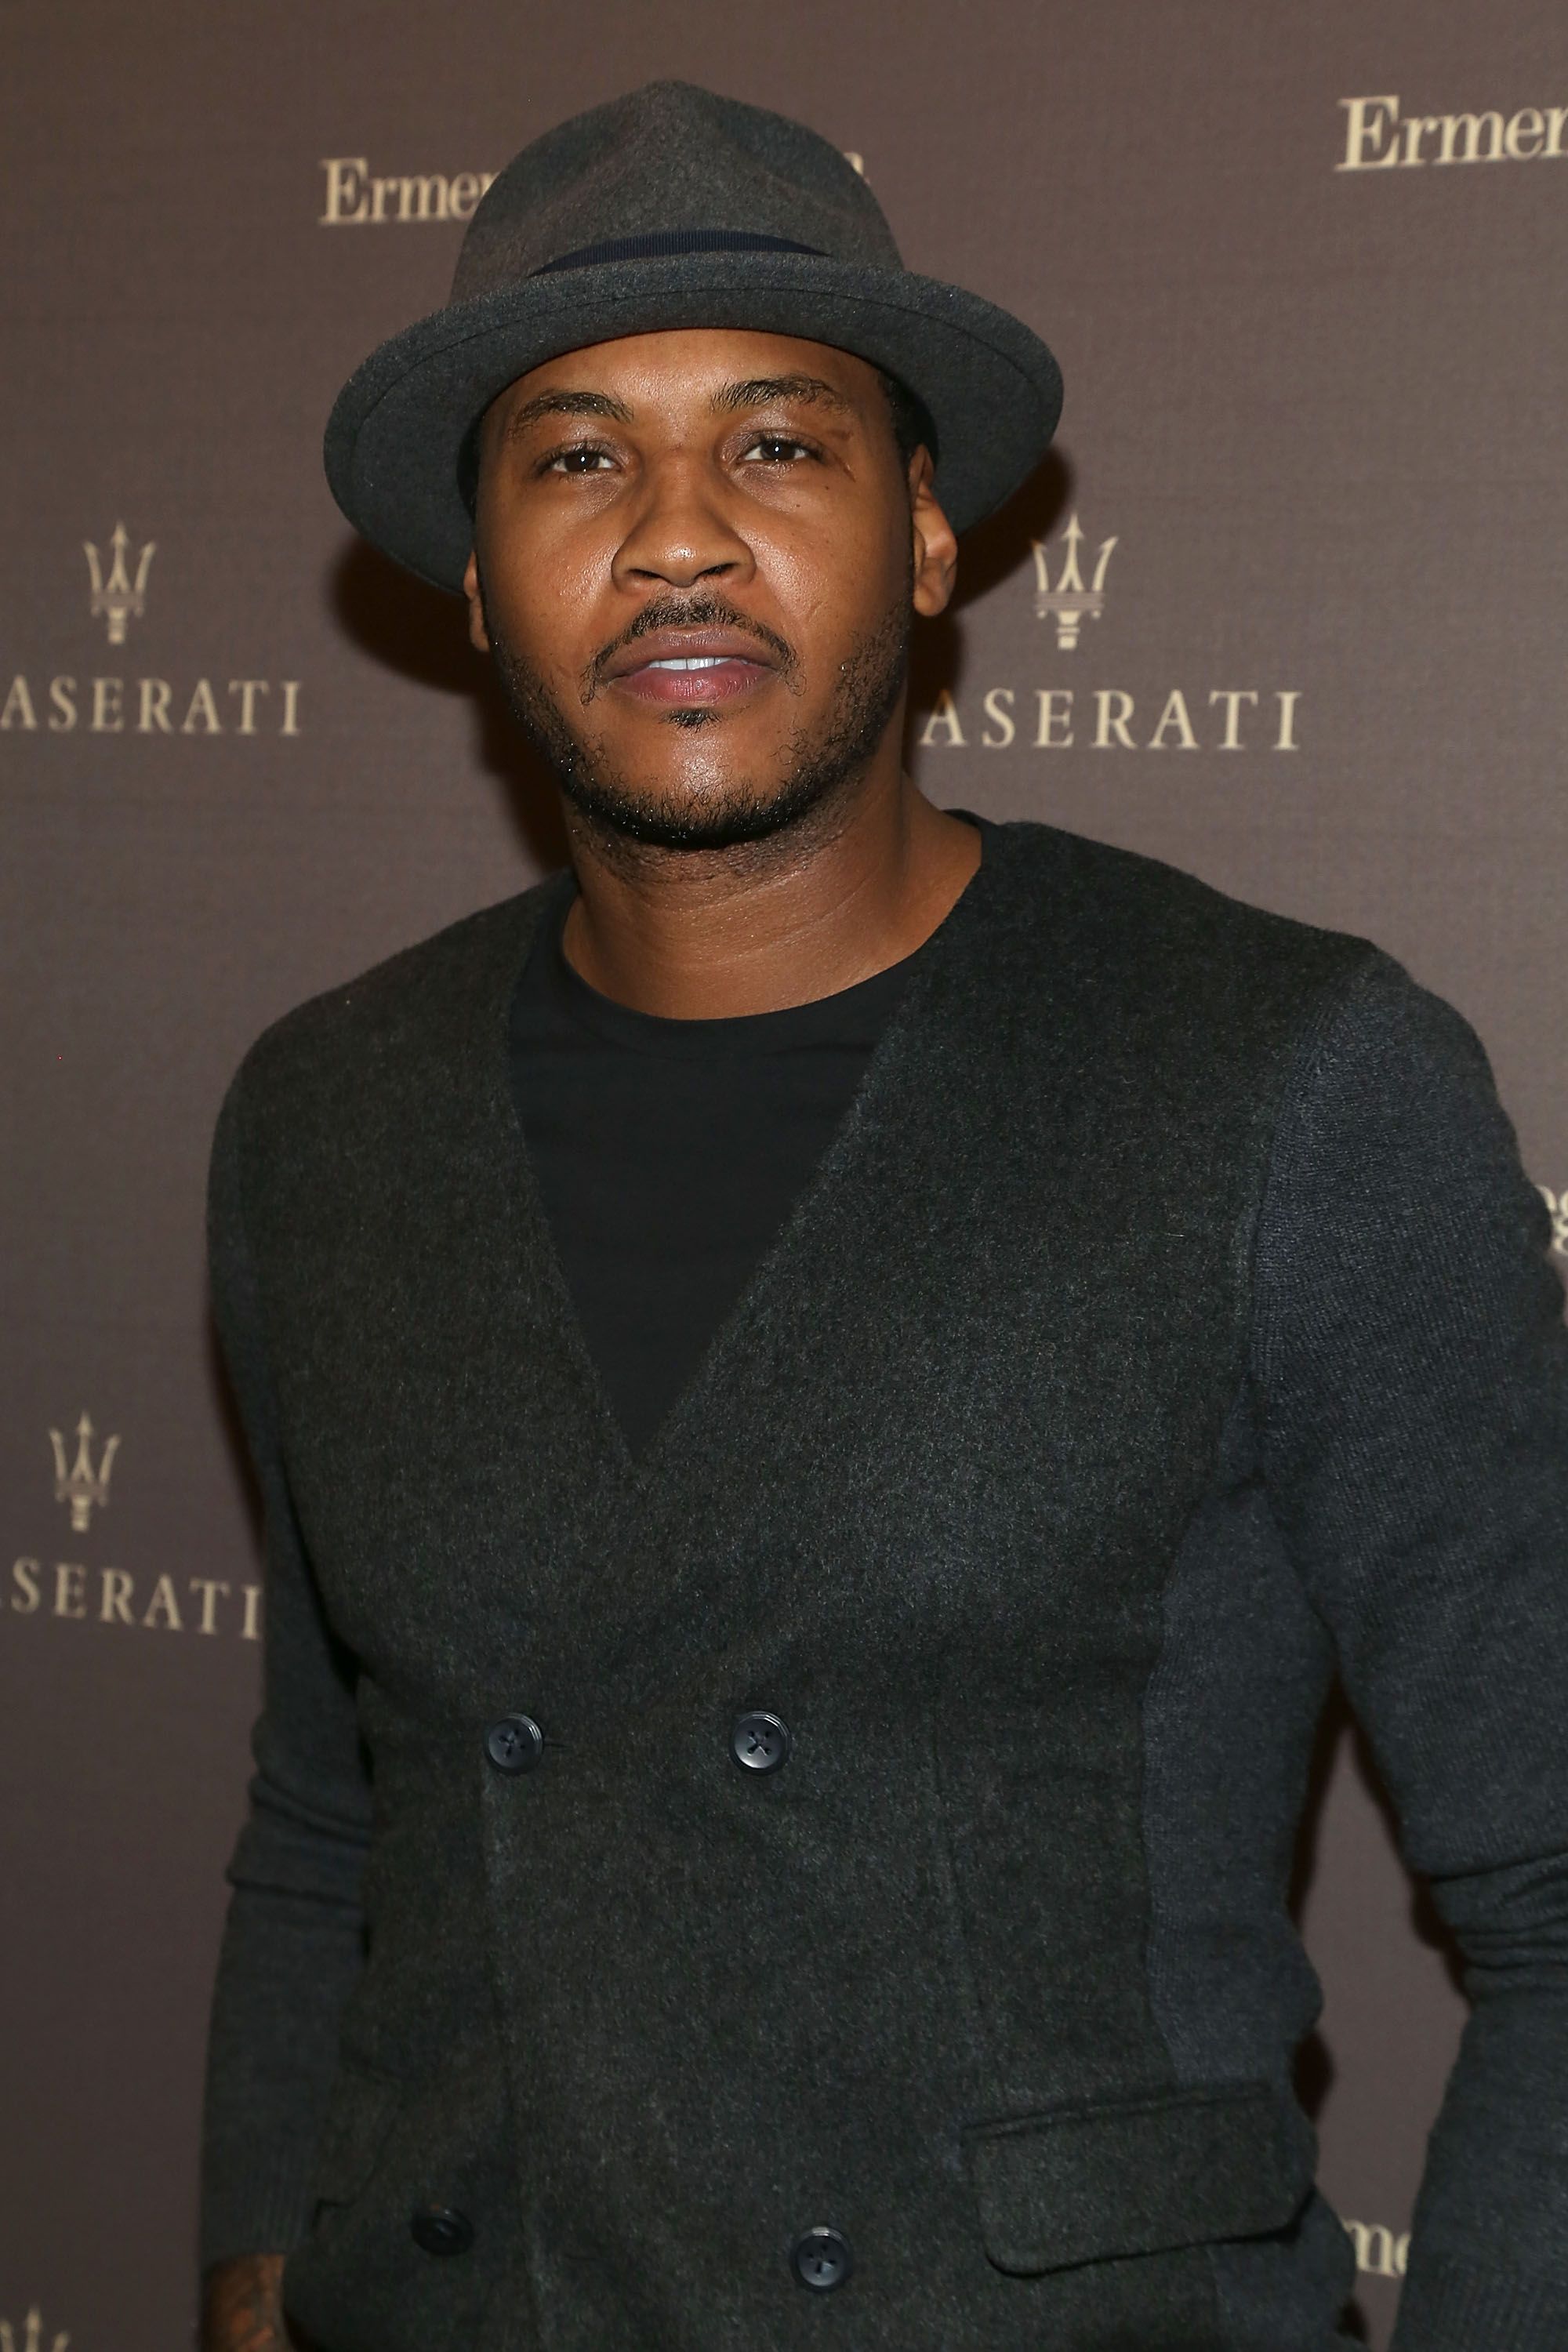 Carmelo Anthony attends a red carpet event | Source: Getty Images/GlobalImagesUkraine